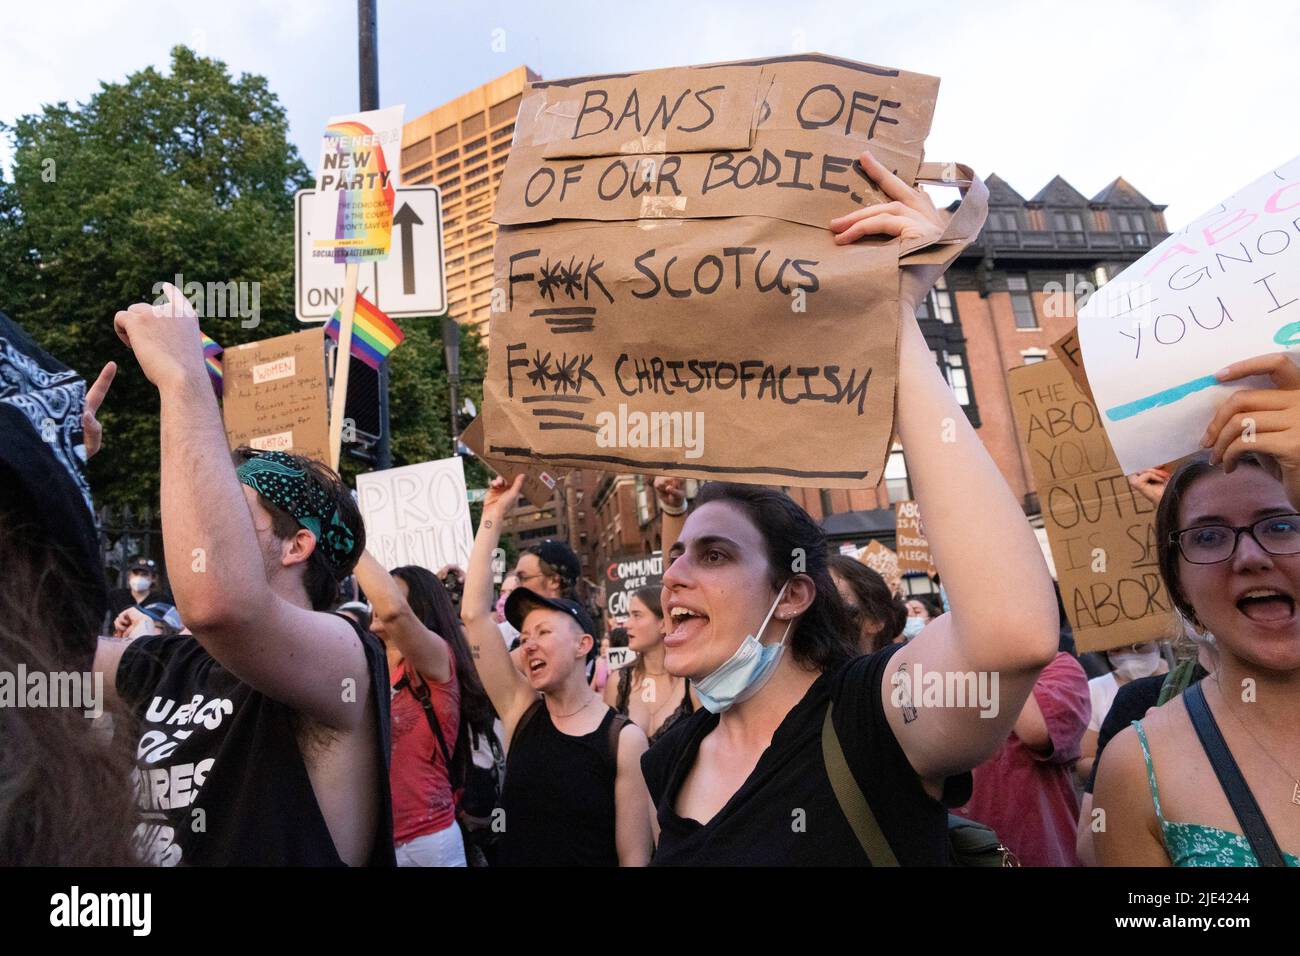 June 24, 2022, Boston, Massachusetts, USA: Abortion rights protesters rally after the U.S. Supreme Court ruled in the Dobbs v Womens Health Organization abortion case, overturning the landmark Roe v Wade abortion decision in Boston Credit: Keiko Hiromi/AFLO/Alamy Live News Stock Photo